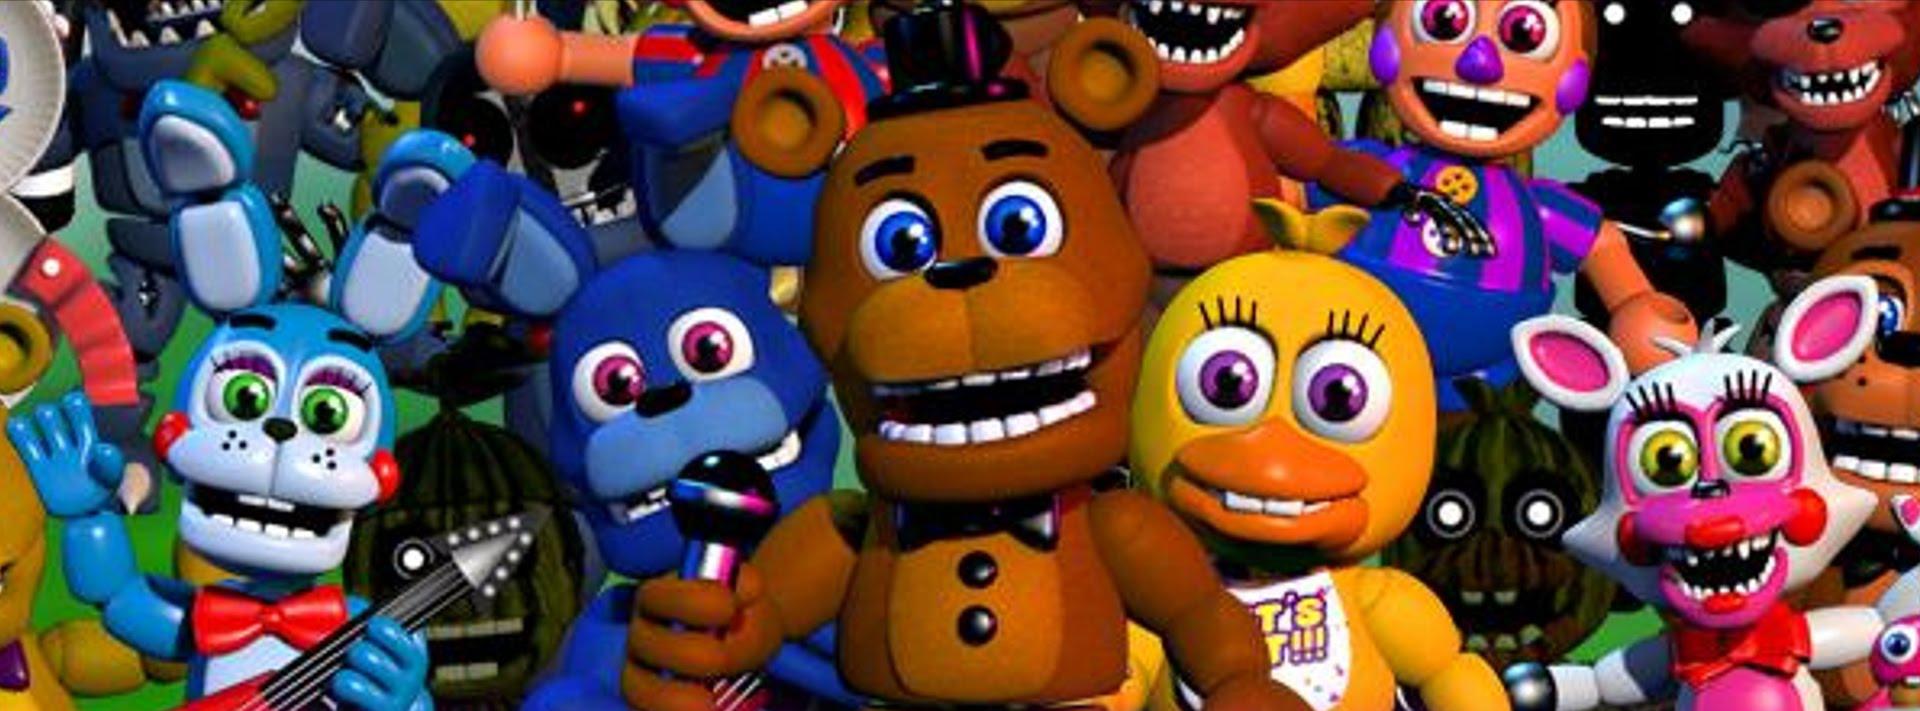 Assista ao teaser do Spin-off de Five Nights at Freddy’s